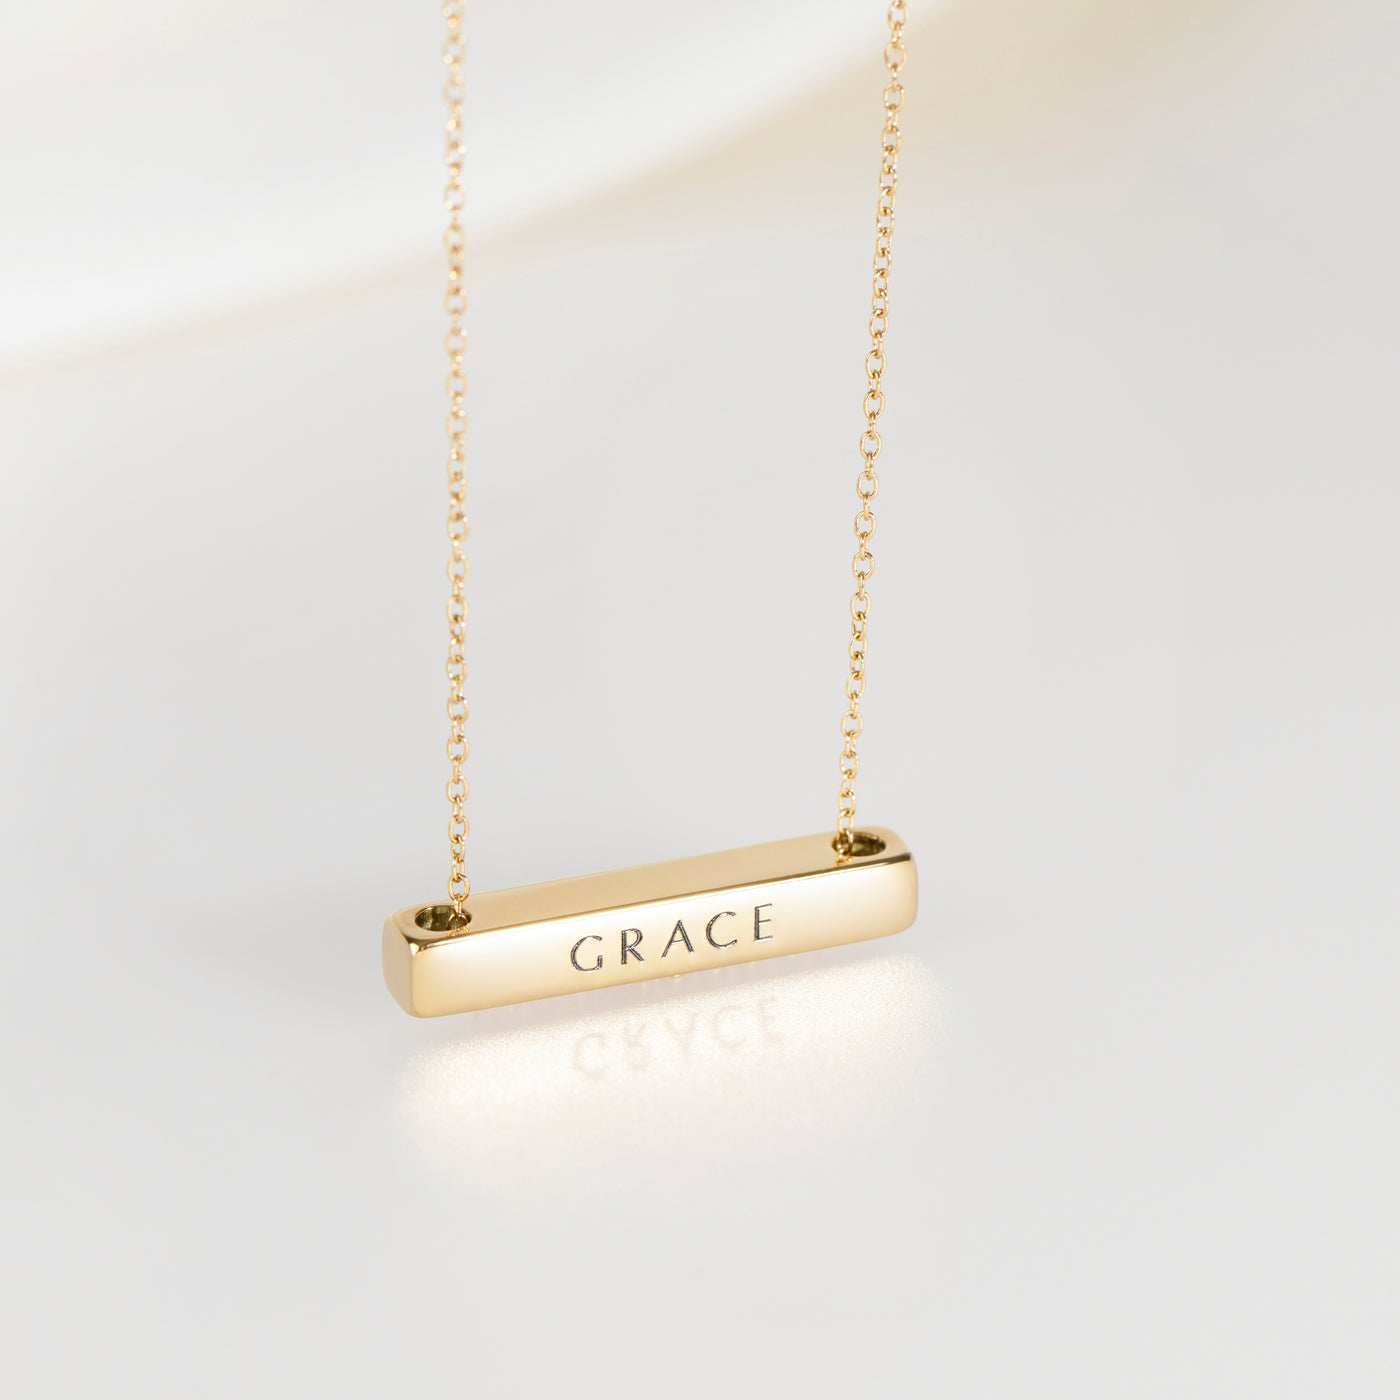 3cm Letter Bar Necklace in Gold Horizontal